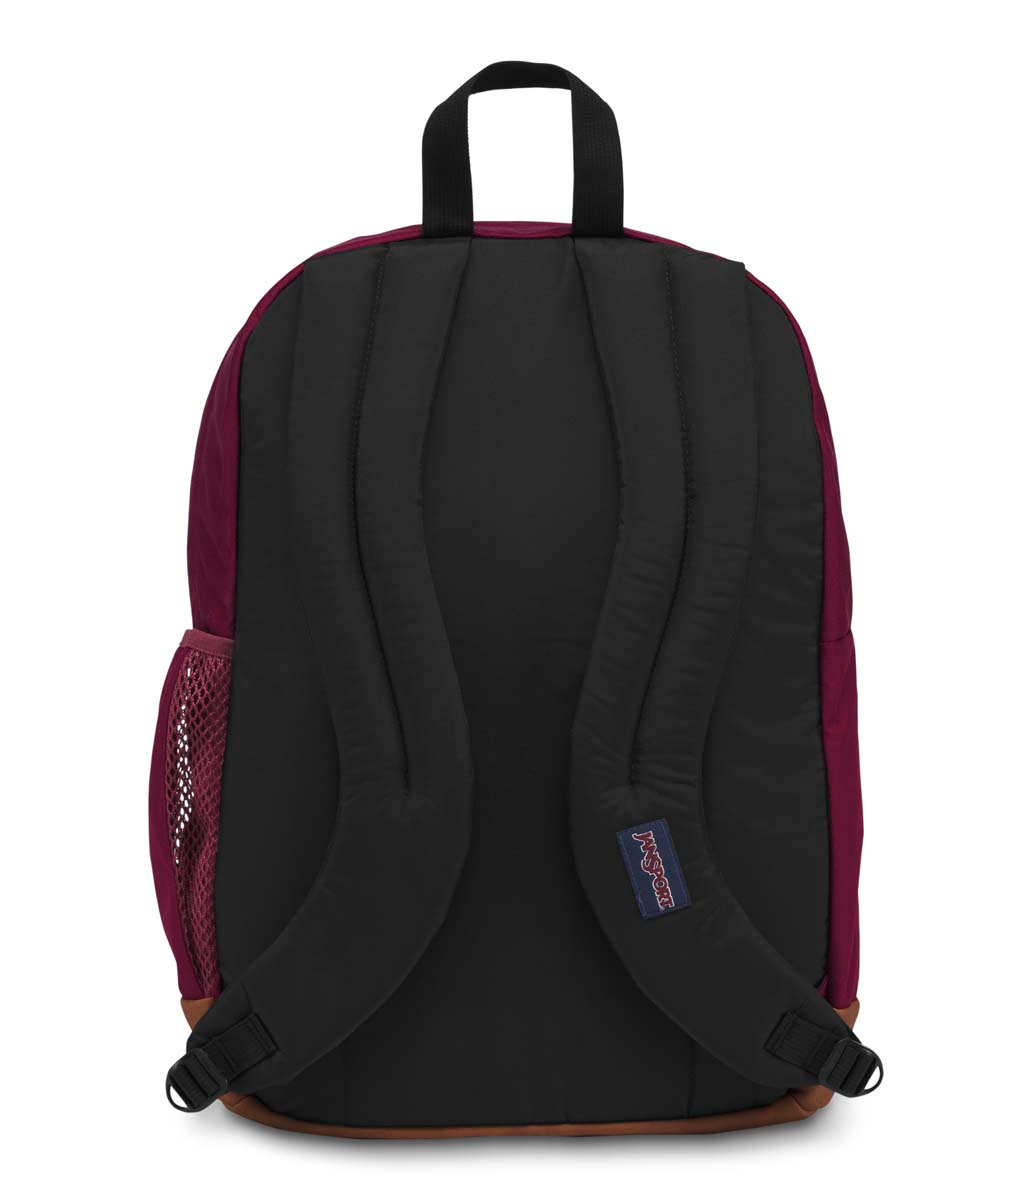 JANSPORT COOL STUDENT RUSSET RED